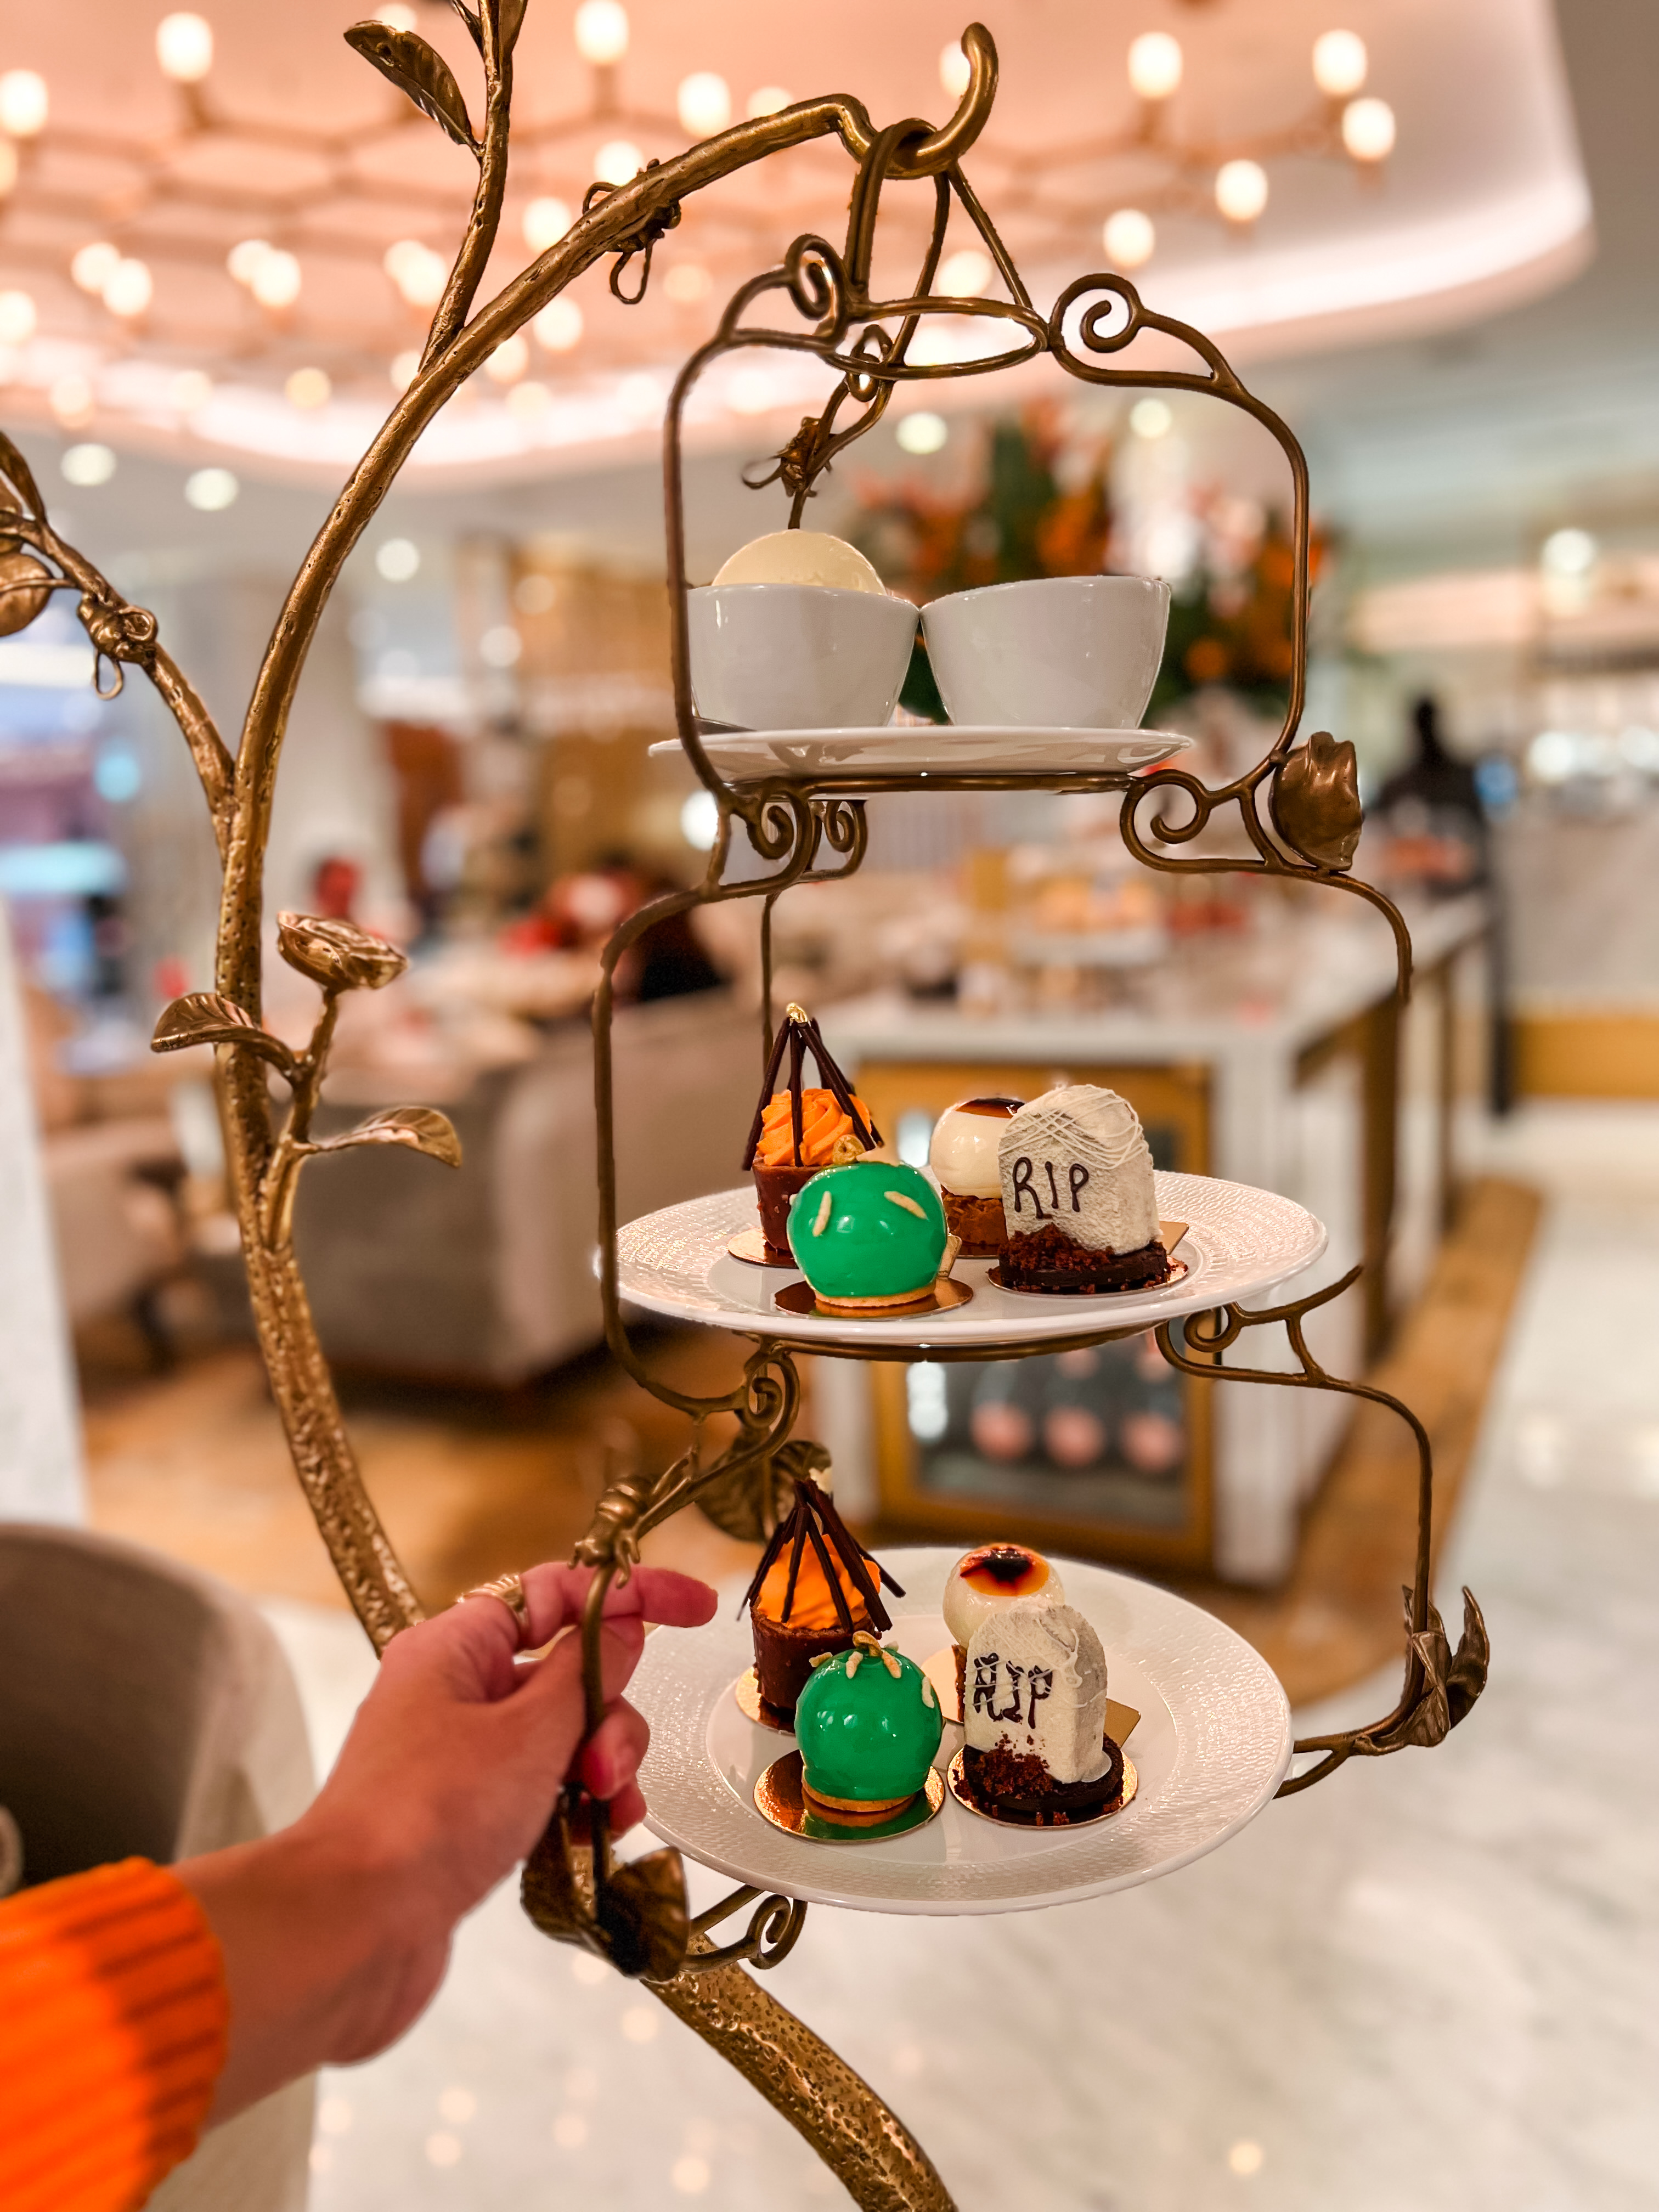 Halloween Afternoon Teas To Try in London: Royal Lancaster Hotel